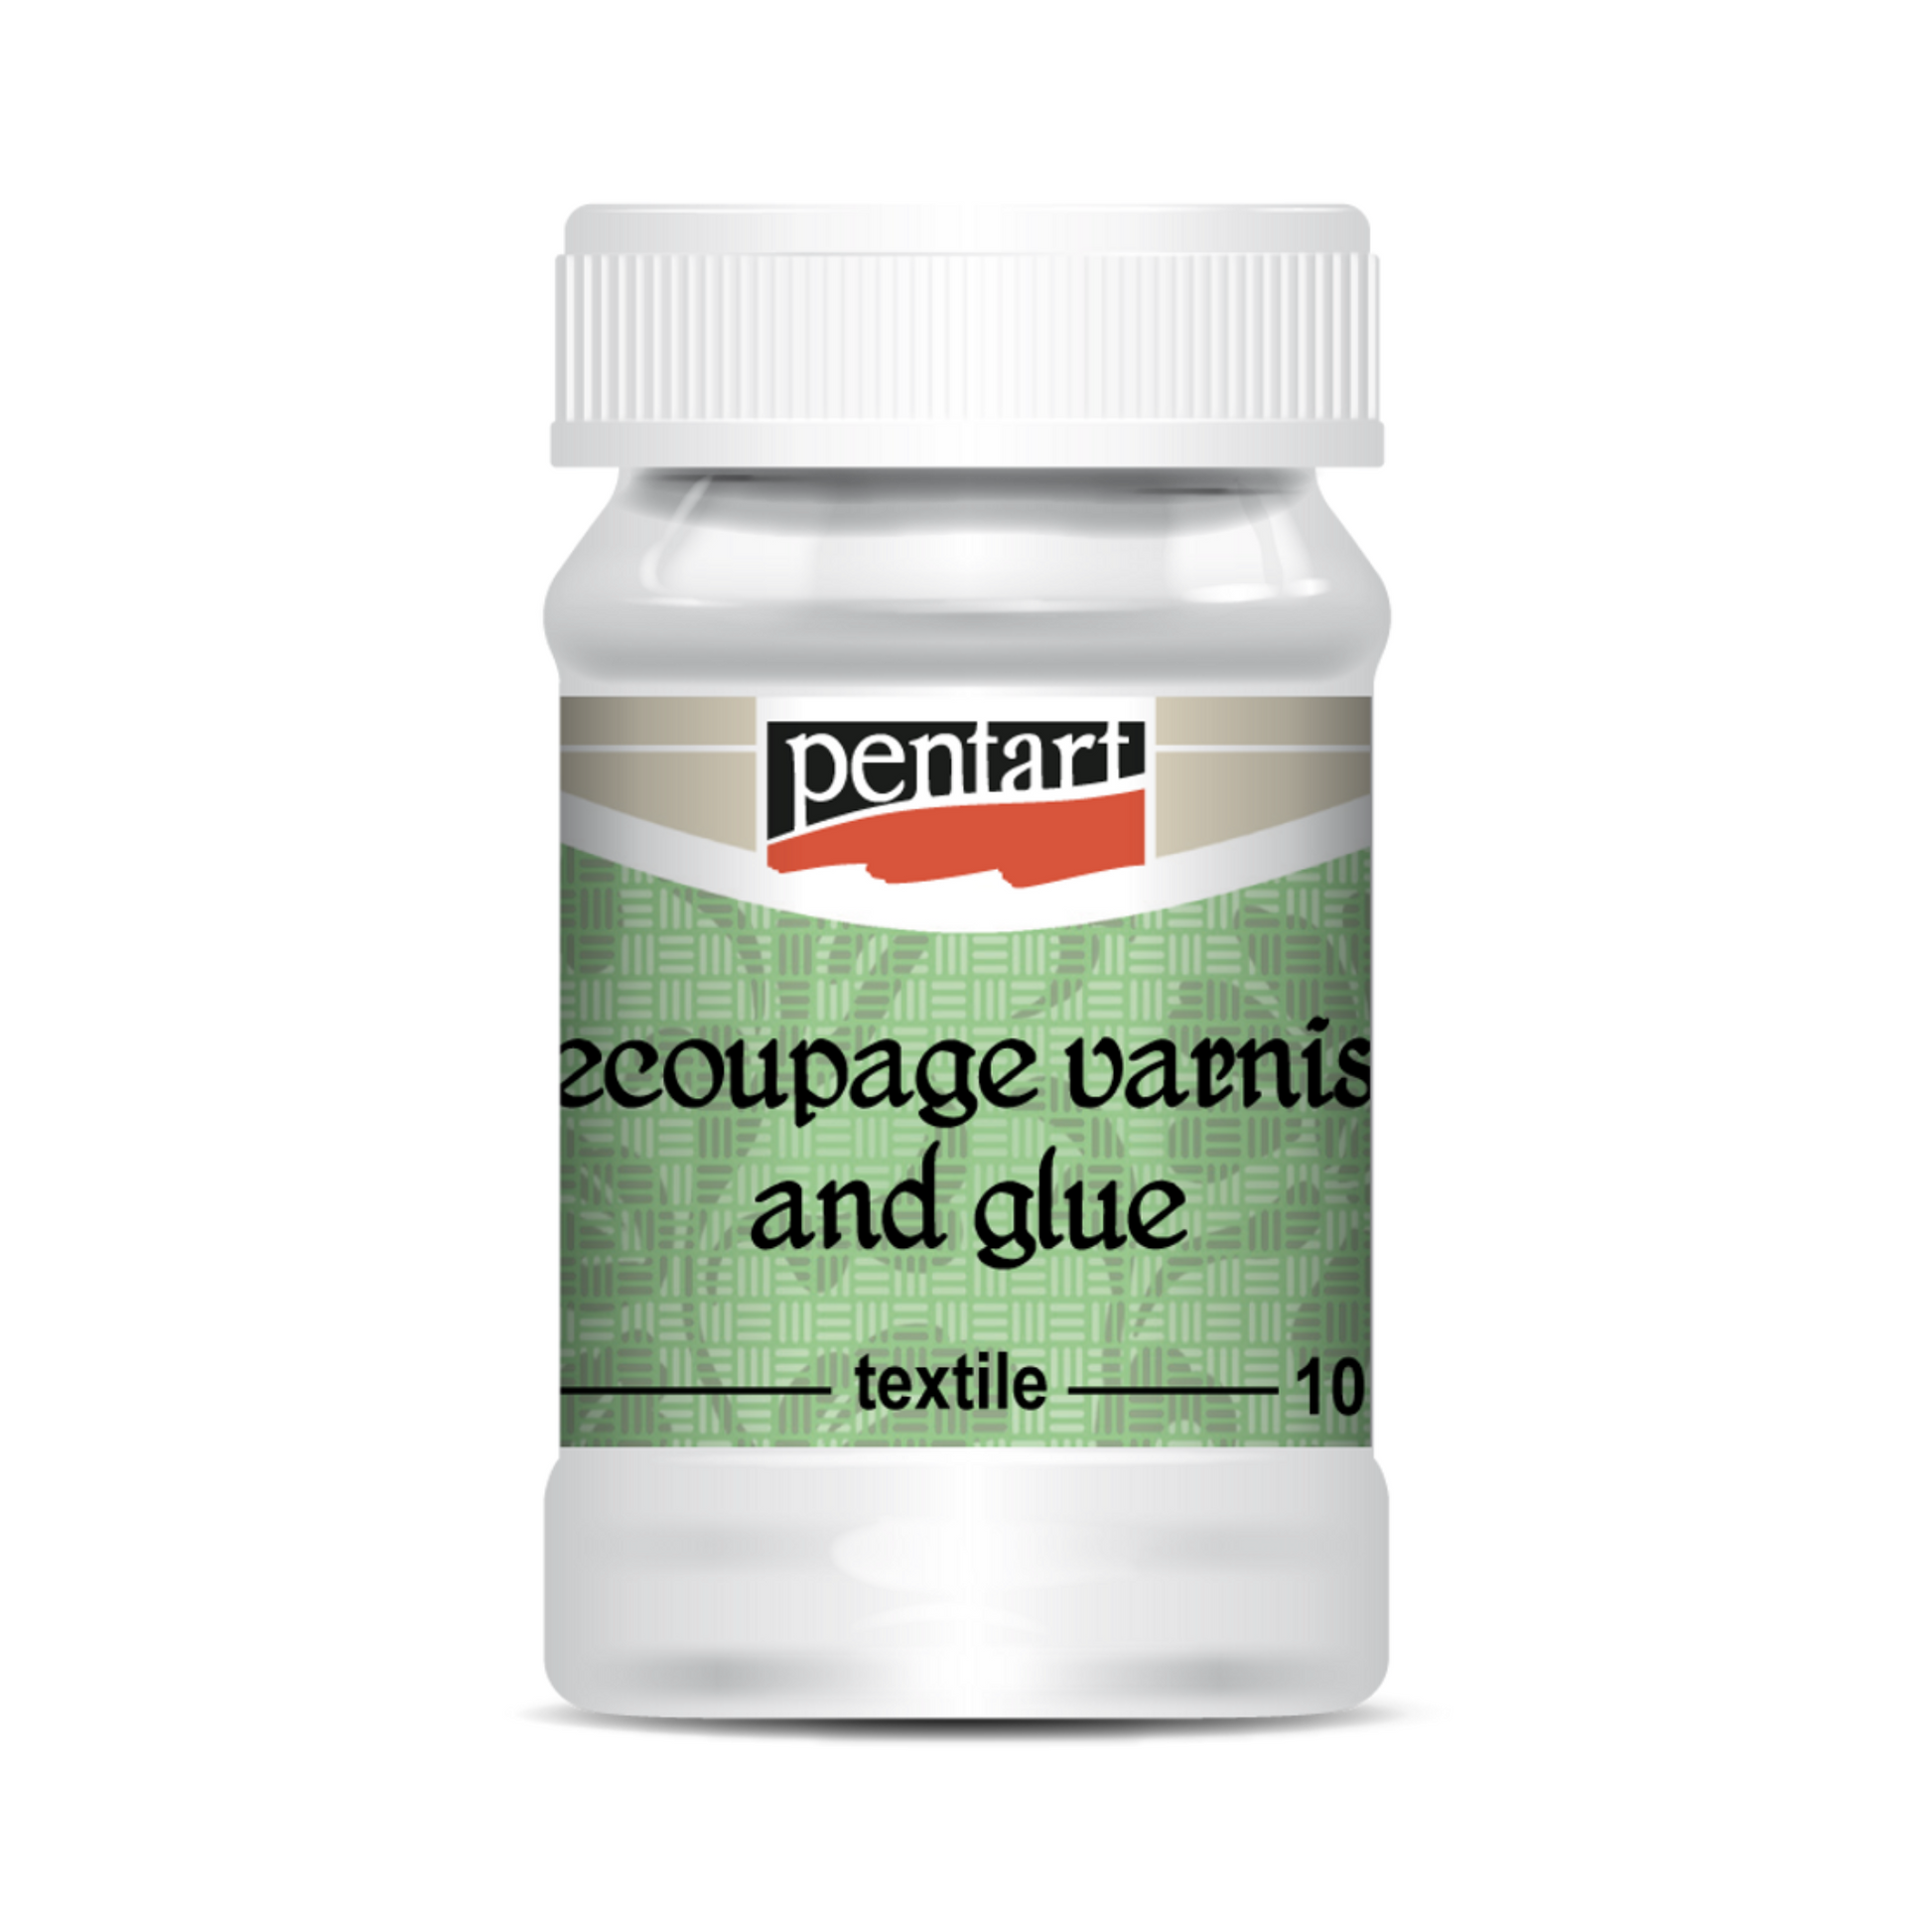 "Decoupage Varnish and Glue-Textile" by Pentart. Use for decoupaging onto fabric and leather. Available at Milton's Daughter.